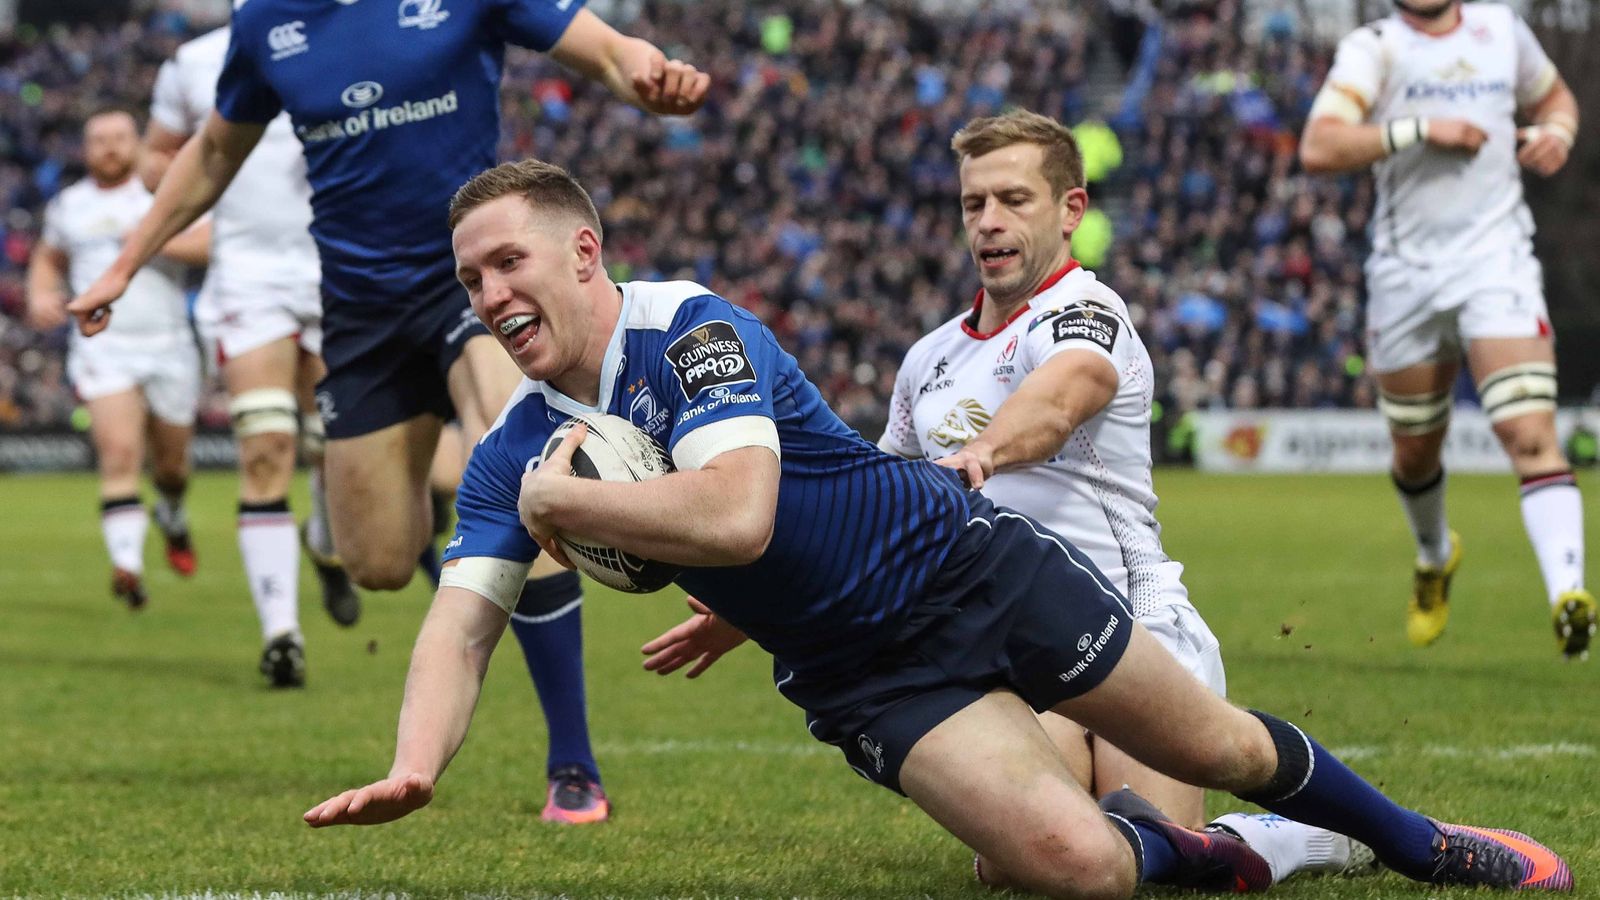 Leinster 22 - 7 Ulster